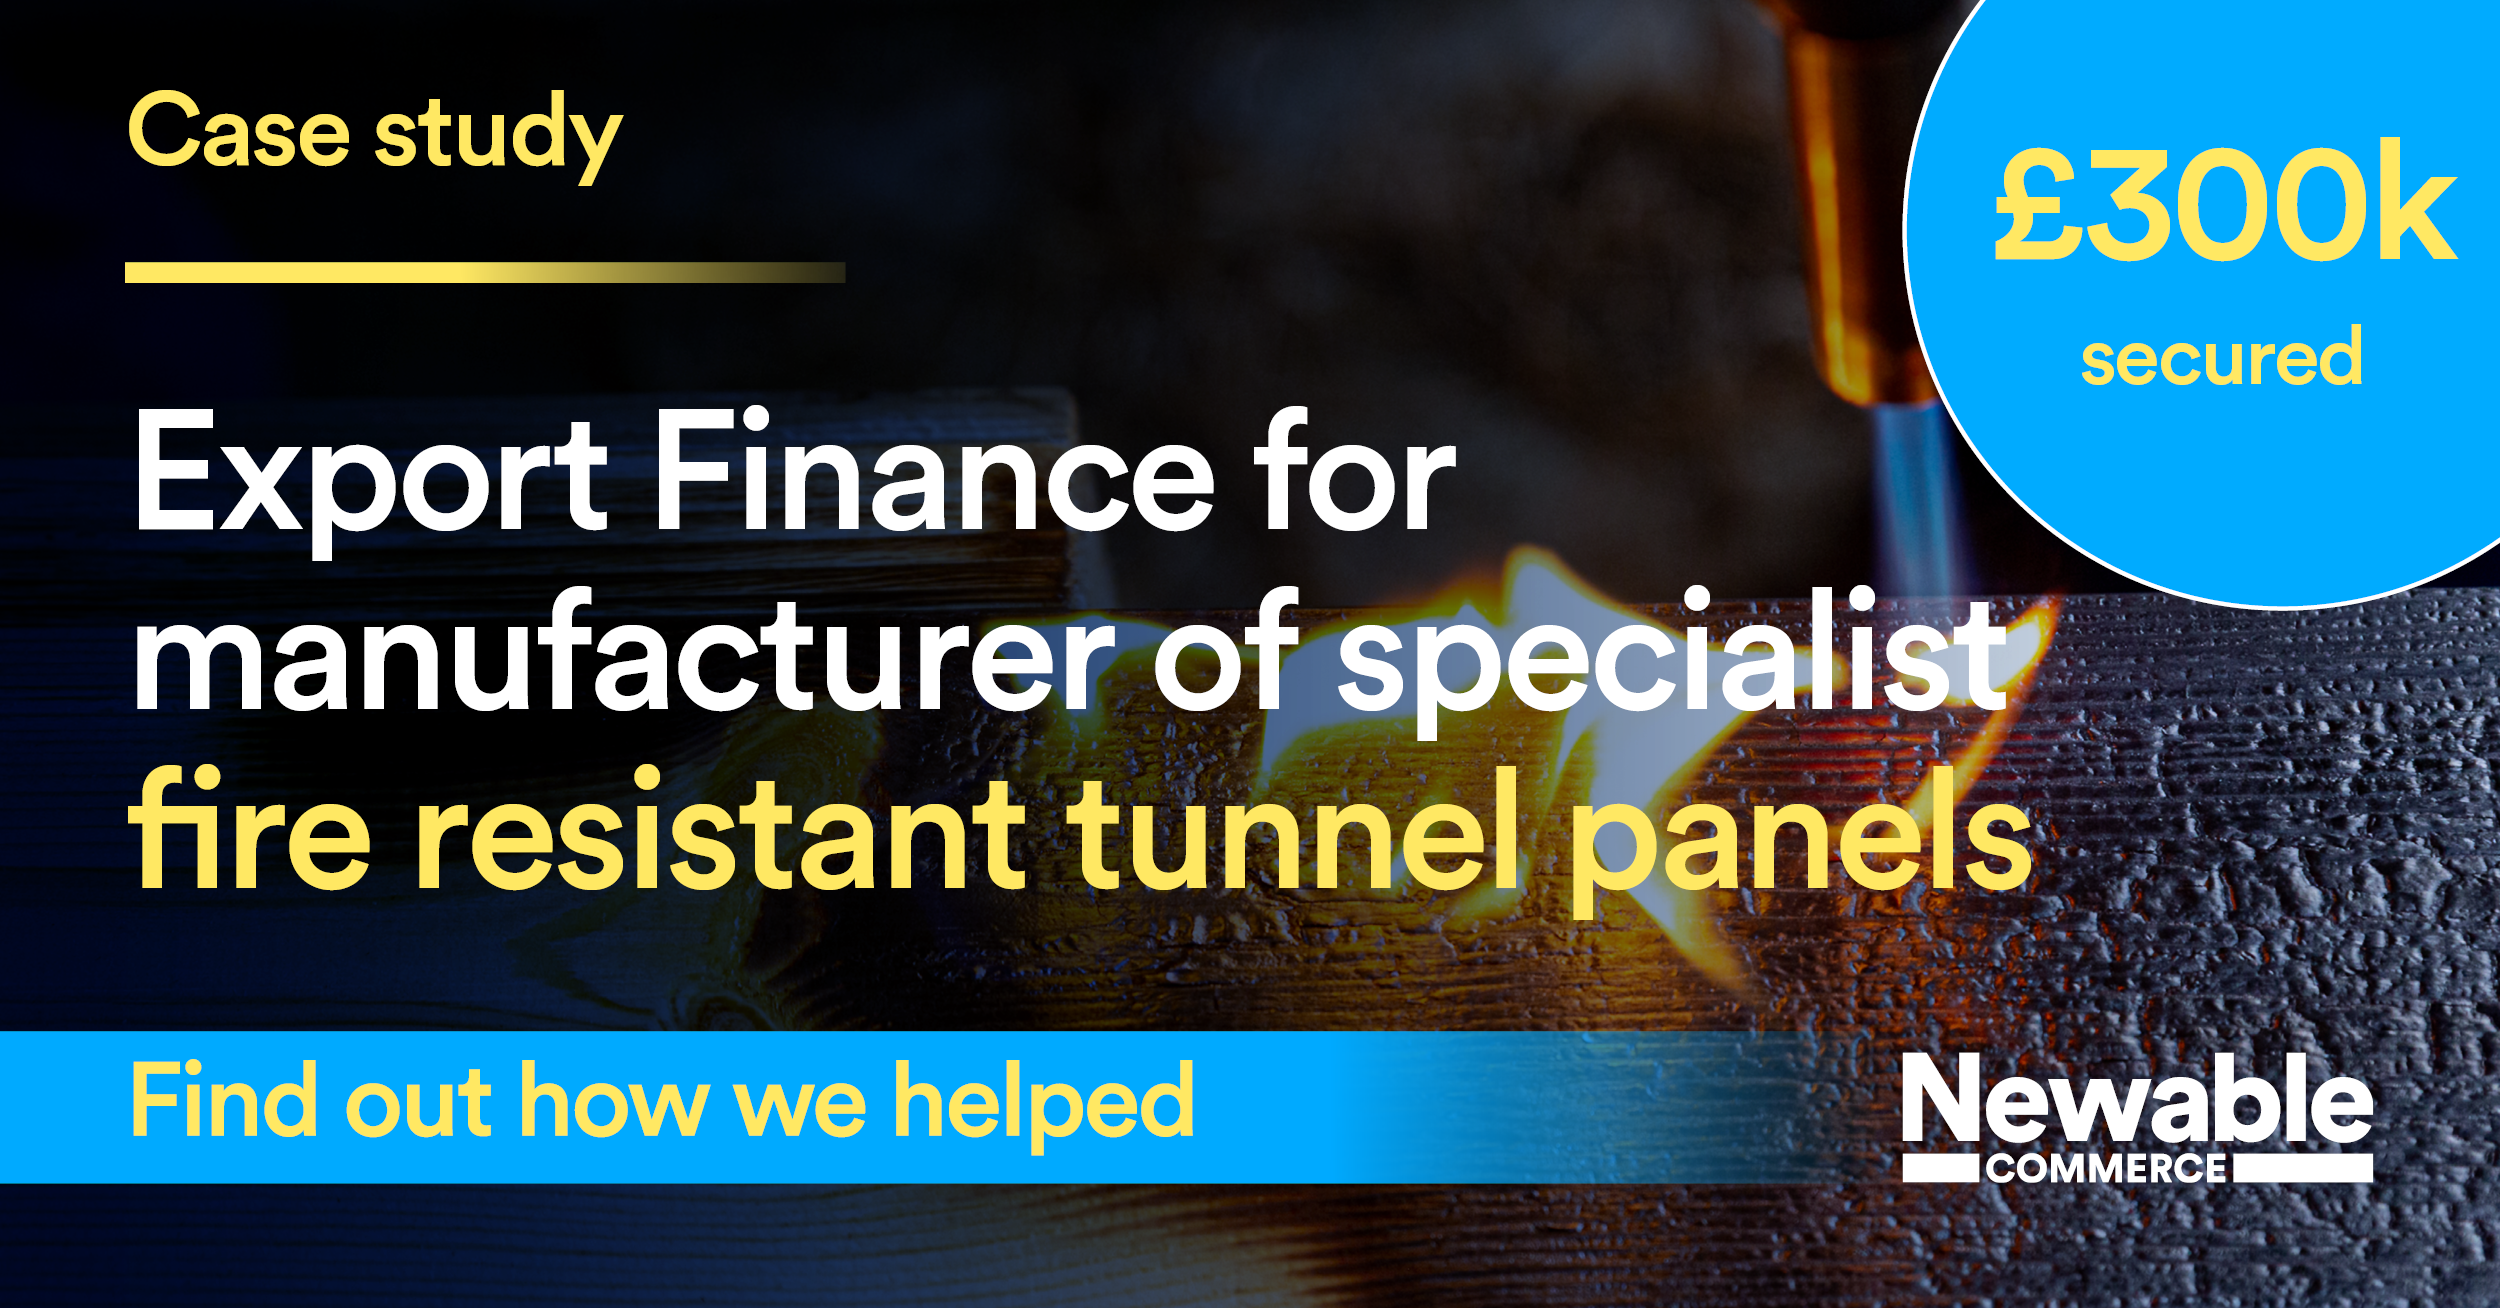 Export Finance for manufacturer of specialist fire resistant tunnel panels